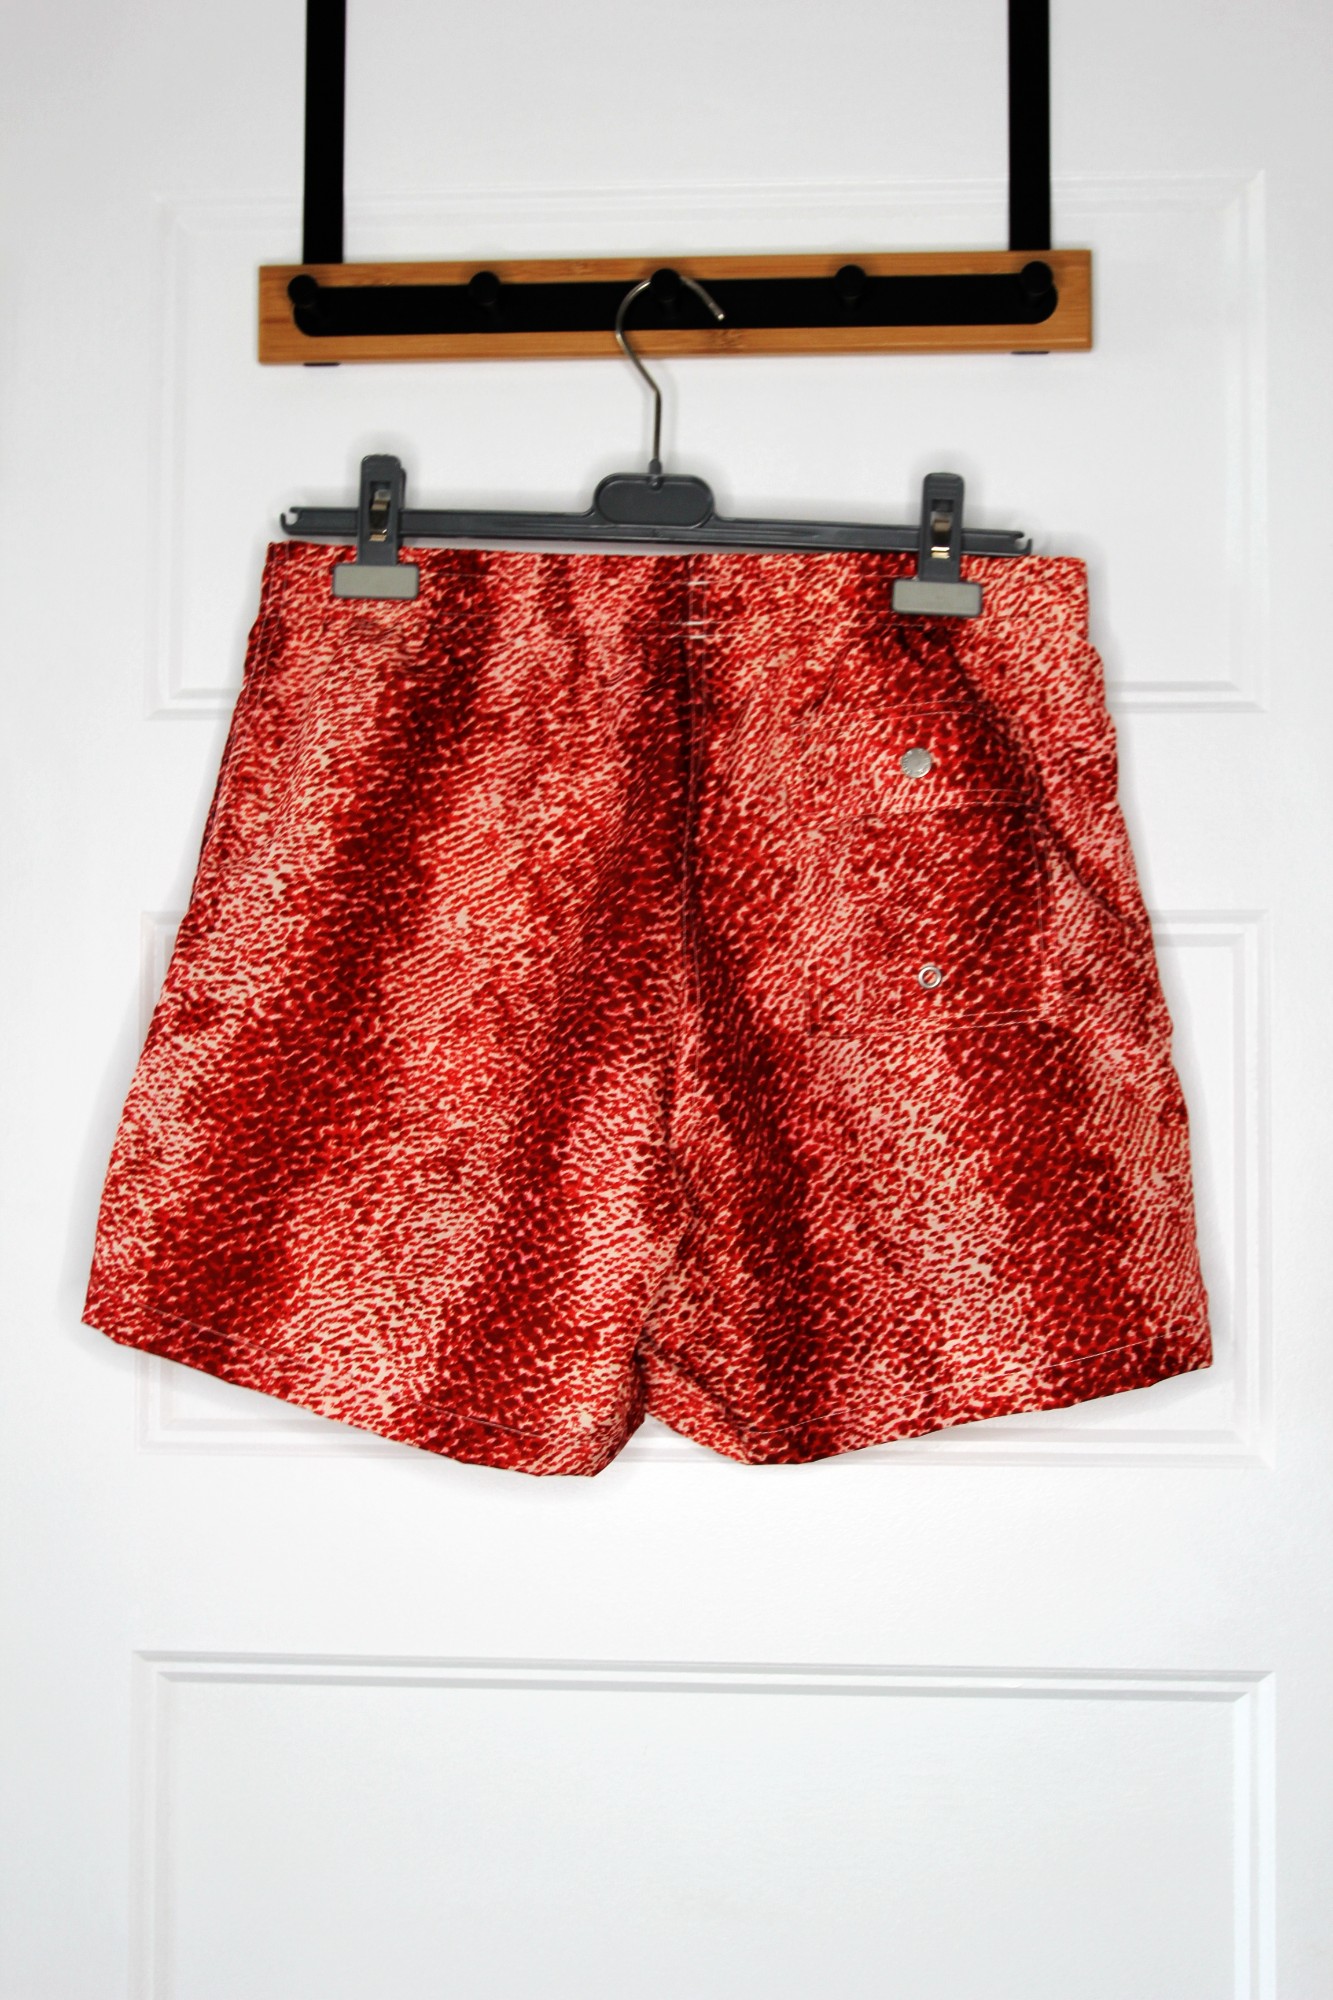 BNWT SS23 BATHER RED PAINTED MOSS SWIM SHORTS M - 3